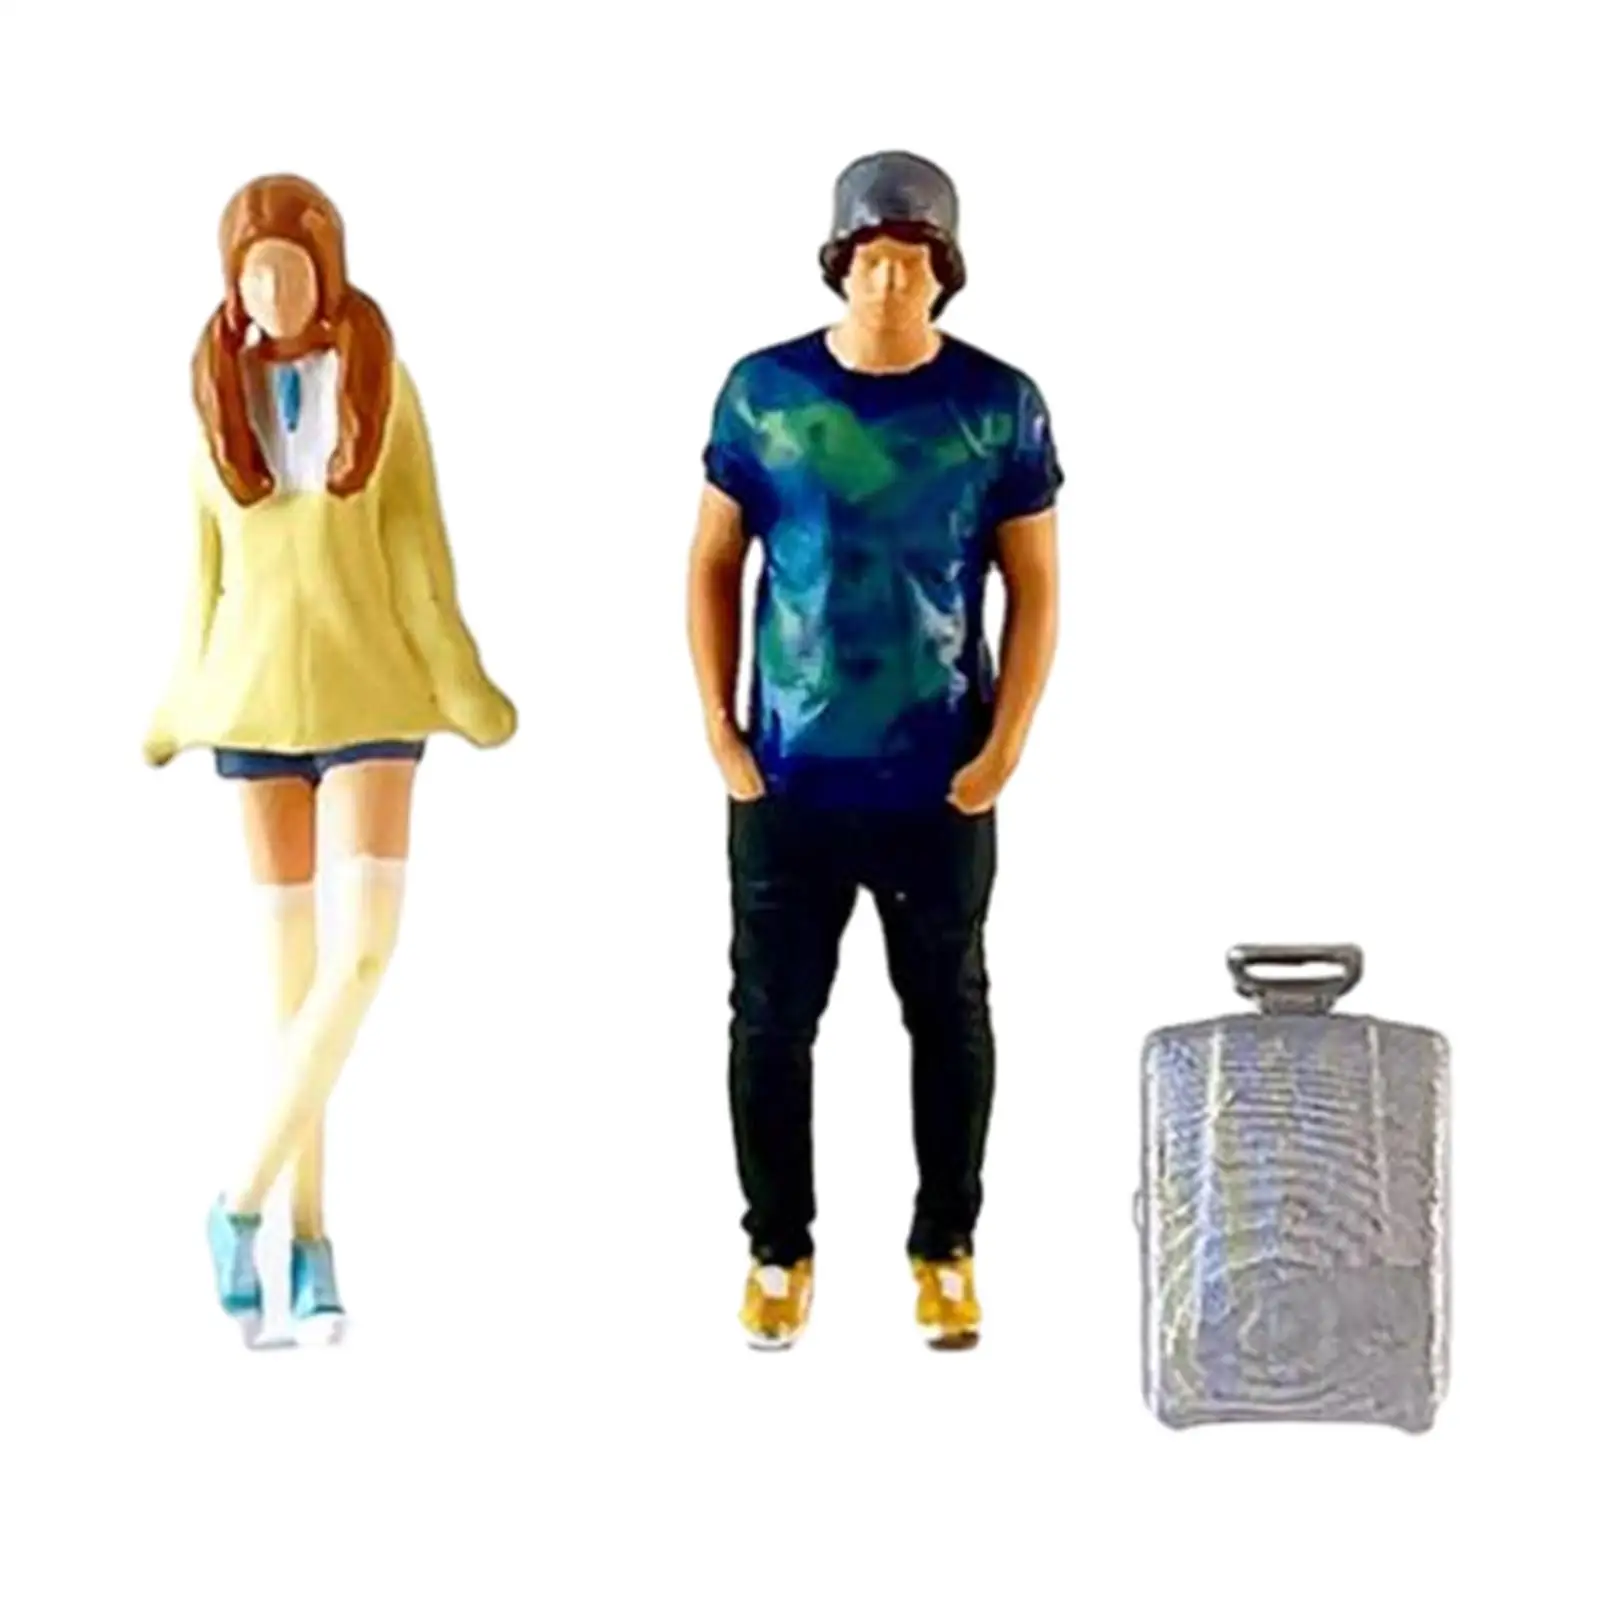 3 Pieces 1:64 Scale Boy and Girl Figures with Suitcase Resin Figurines